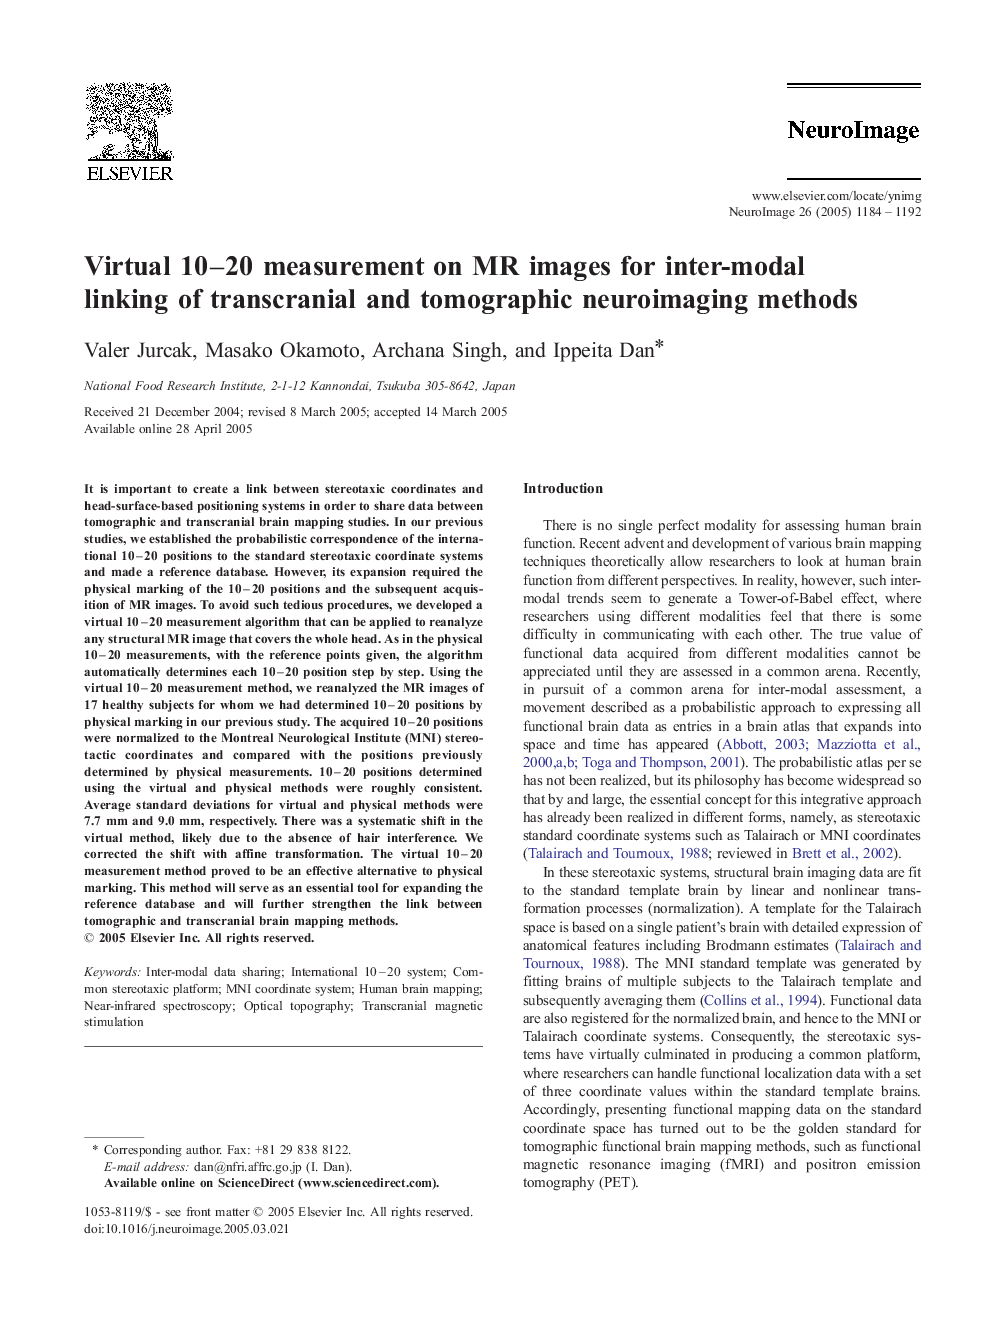 Virtual 10-20 measurement on MR images for inter-modal linking of transcranial and tomographic neuroimaging methods